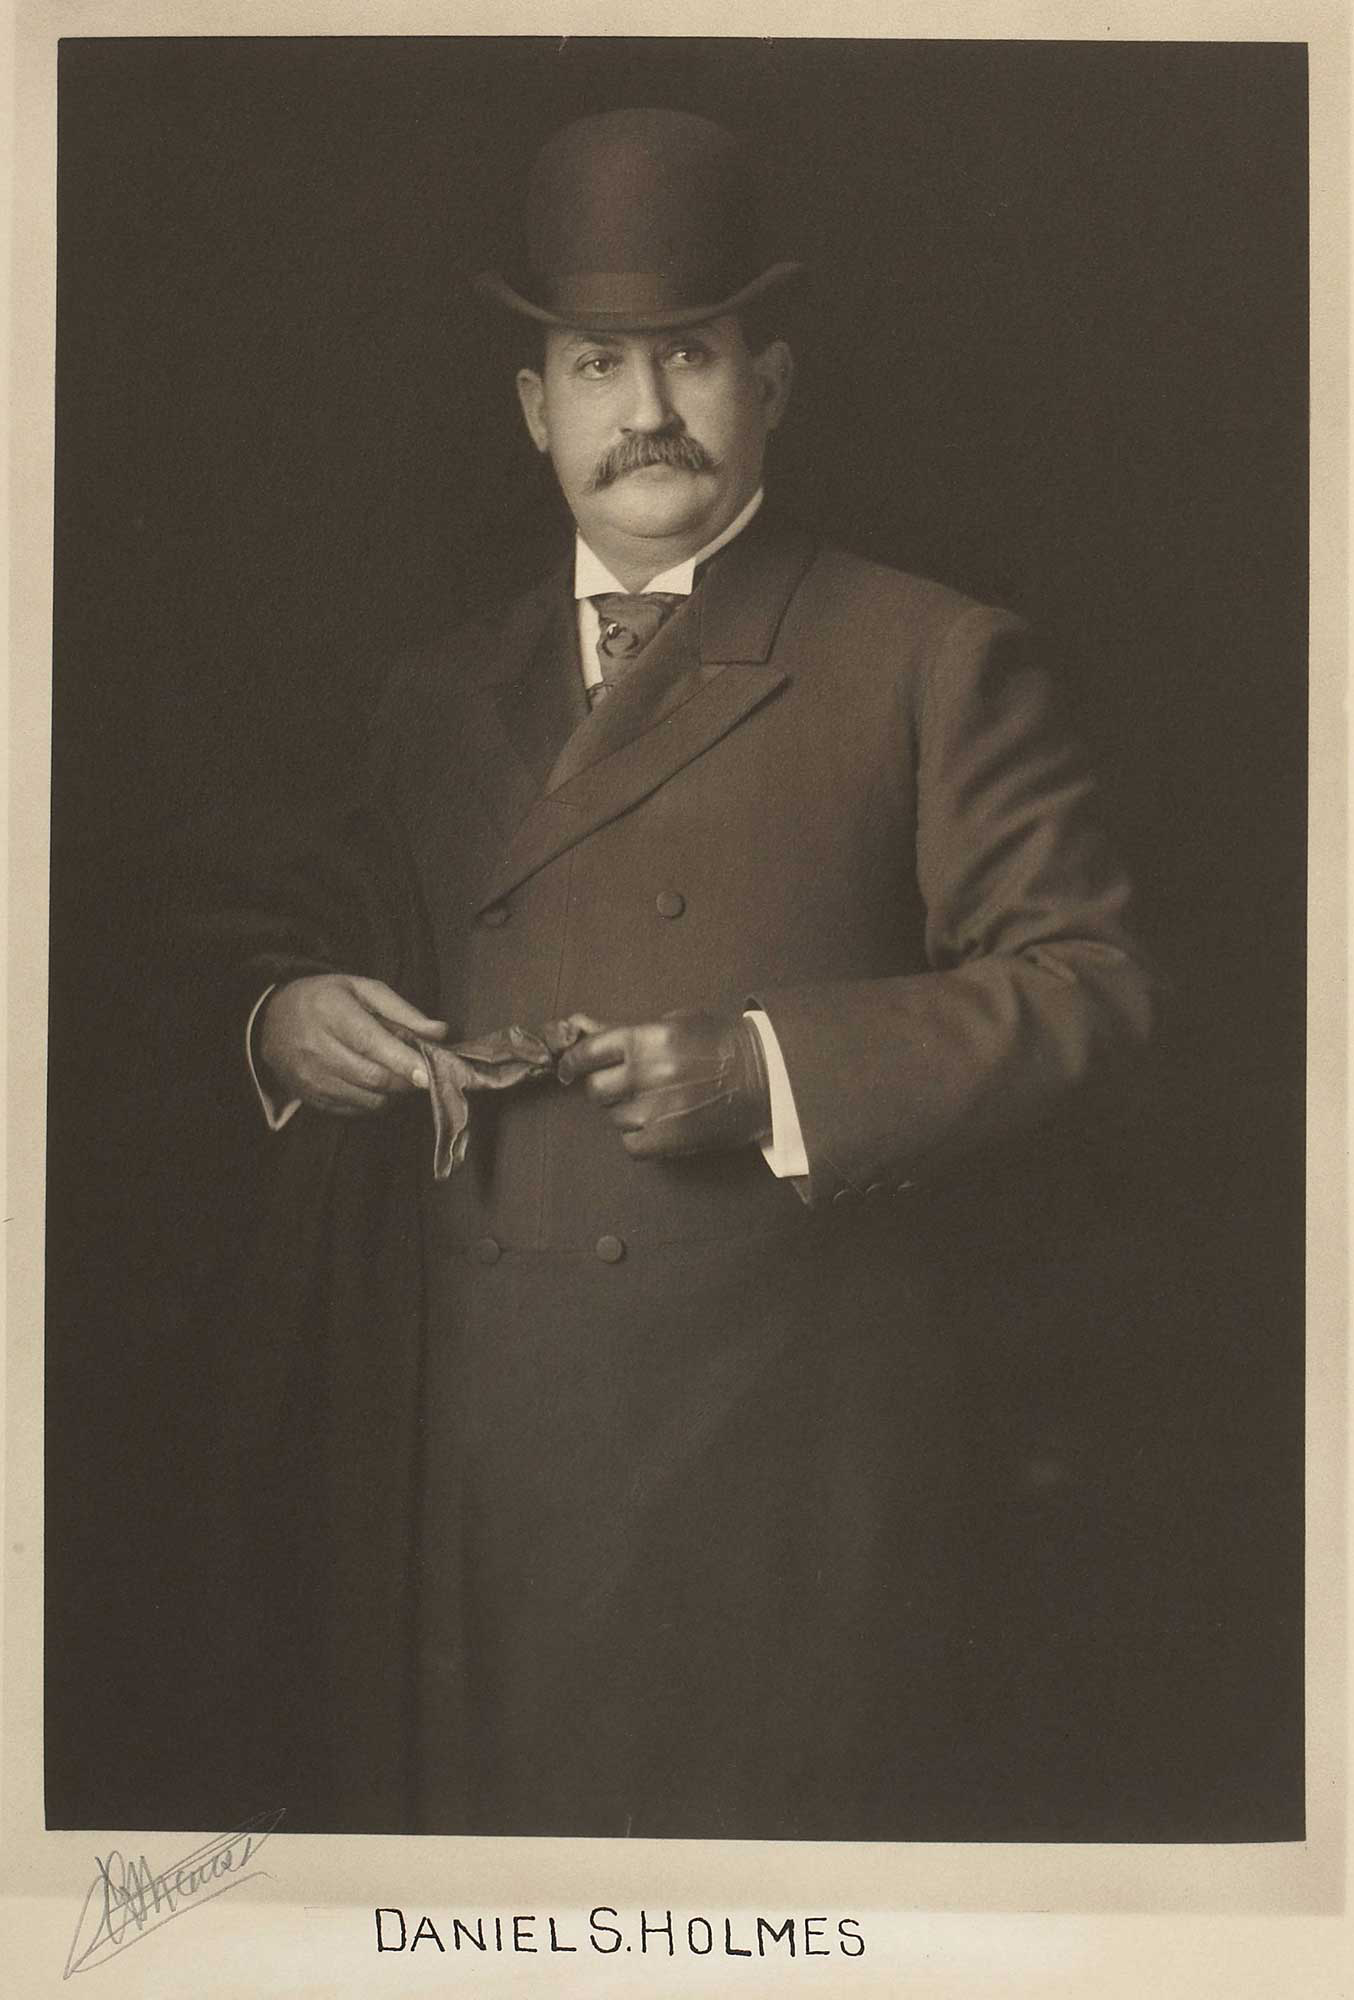 <p>Portrait of Saint Louis businessman Daniel S. Holmes taken by noted photographer J.C. Strauss circa 1895. Holmes served as a Director of the American Exchange Bank.</p>
